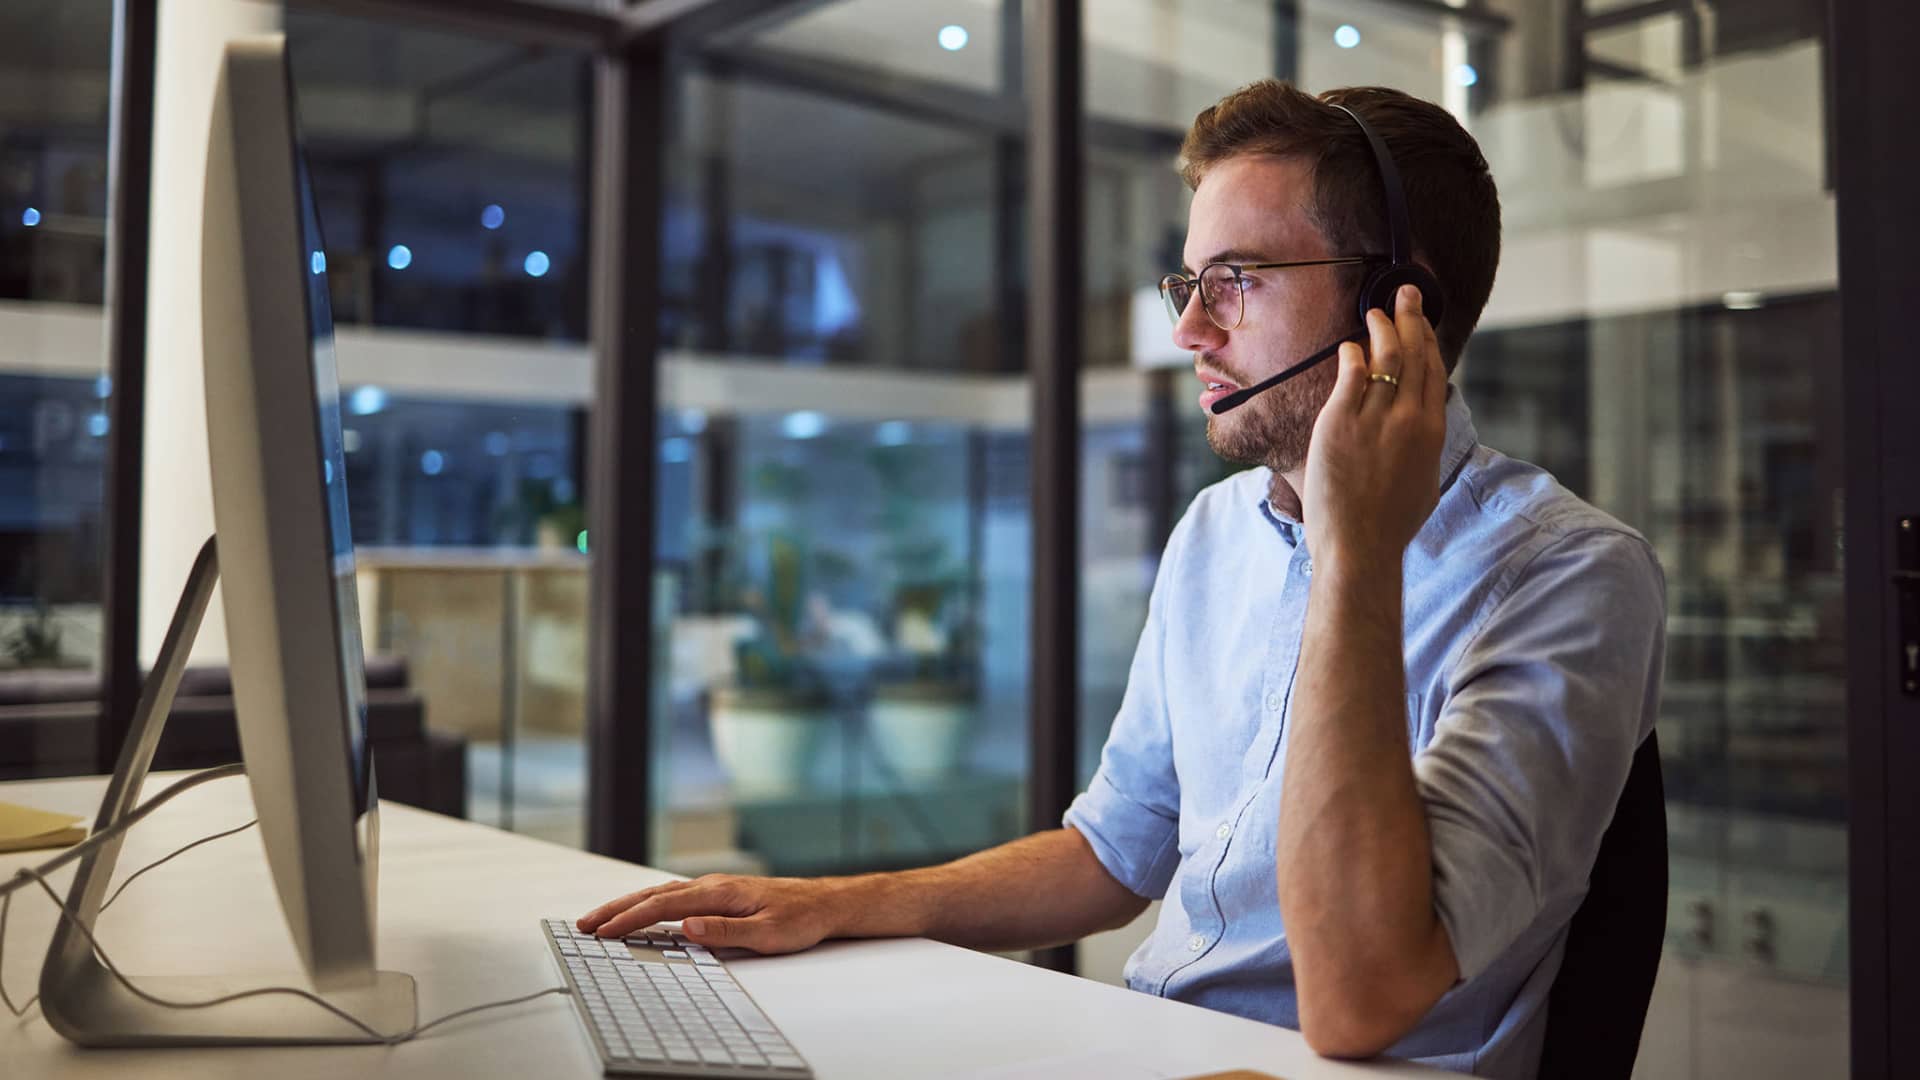 Customer Support: Dedicated Assistance for Seamless IT Solutions